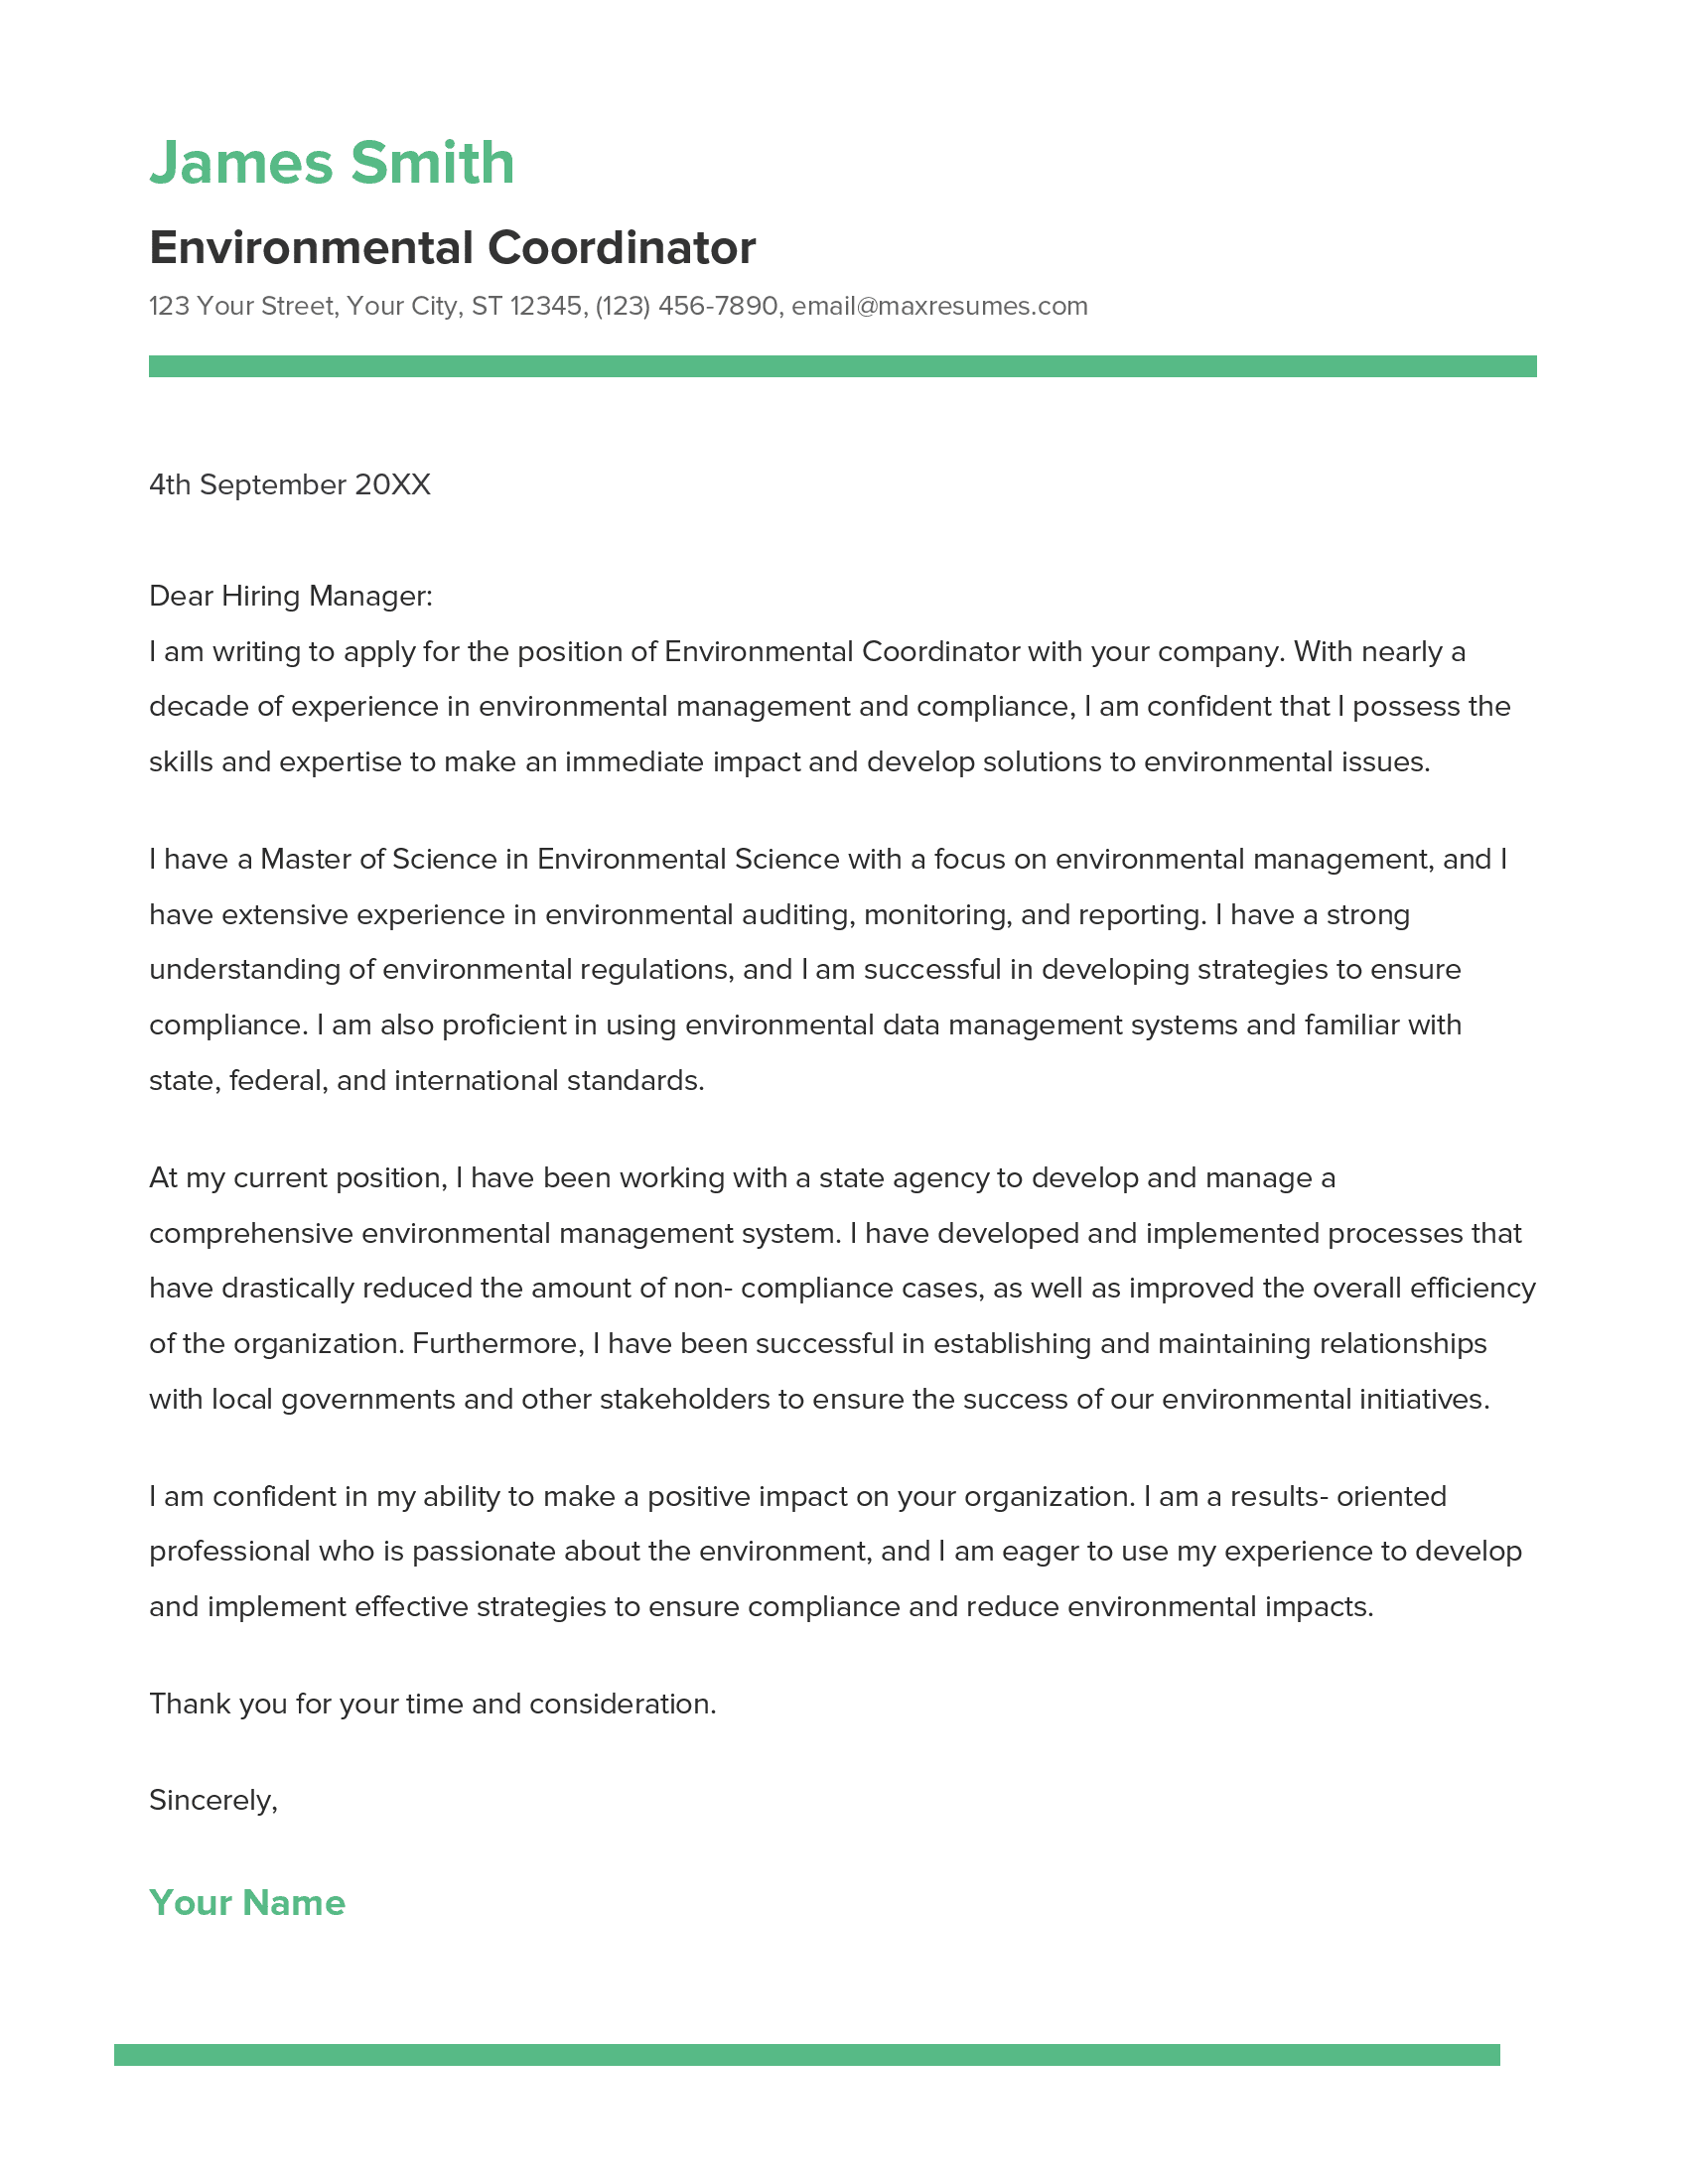 Environmental Coordinator Cover Letter Example